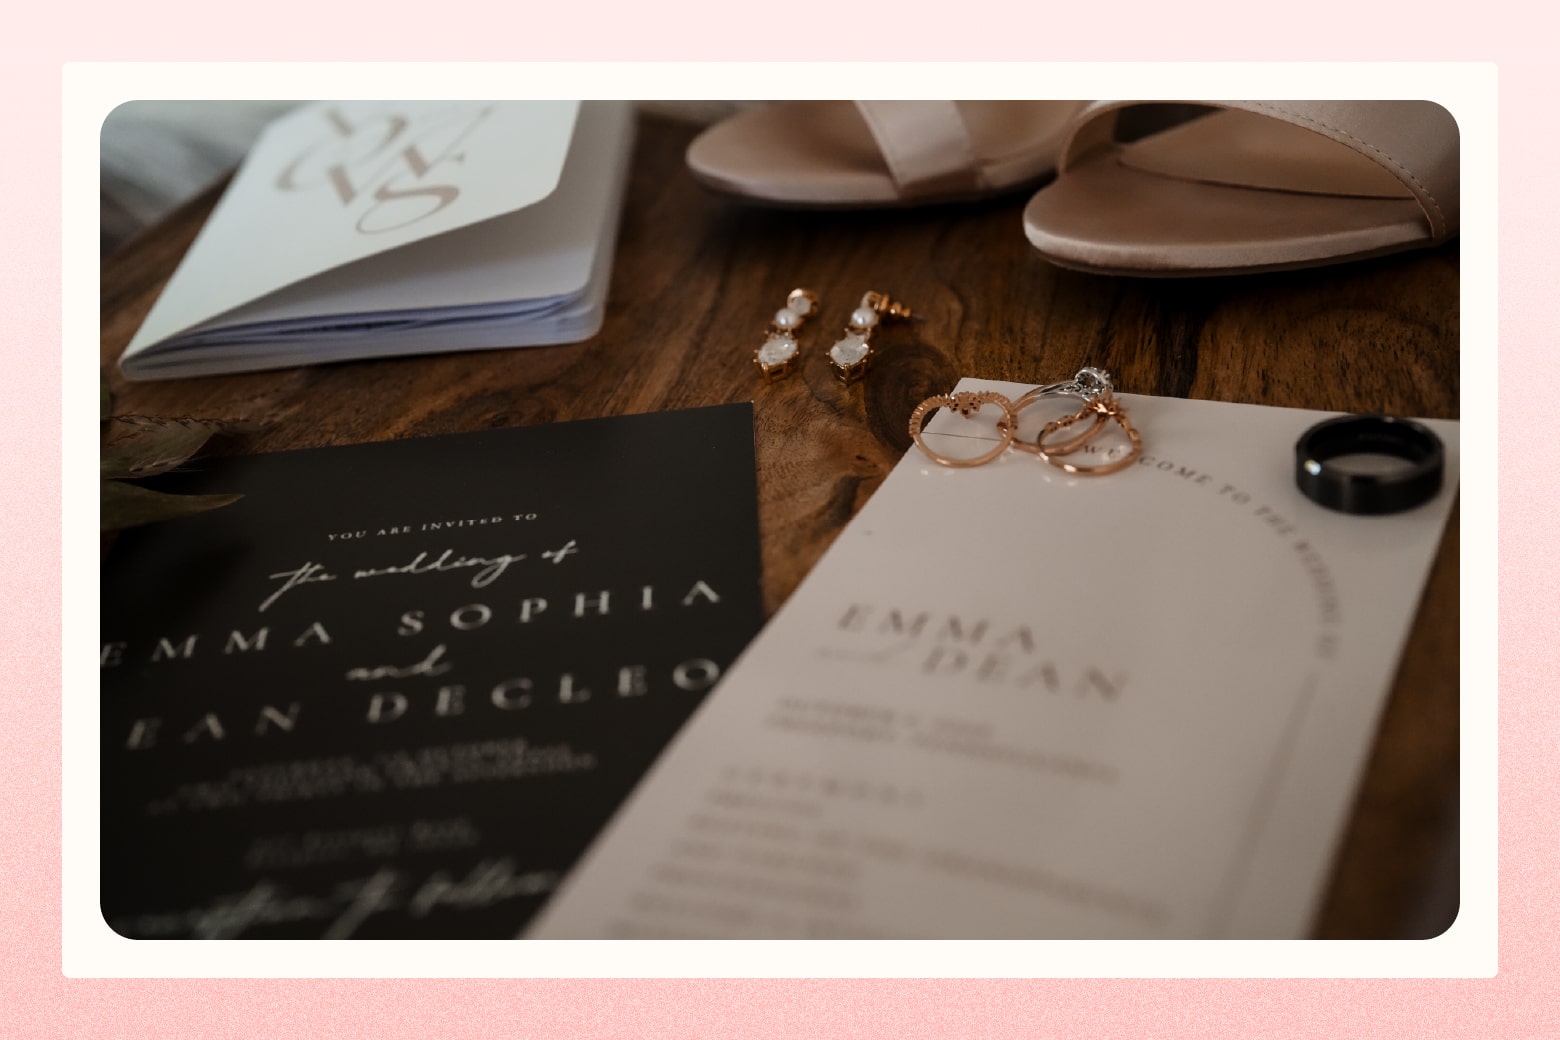 Wedding invitation for Emma and Dean laying on table with wedding bands, earrings, and bridal shoes alongside